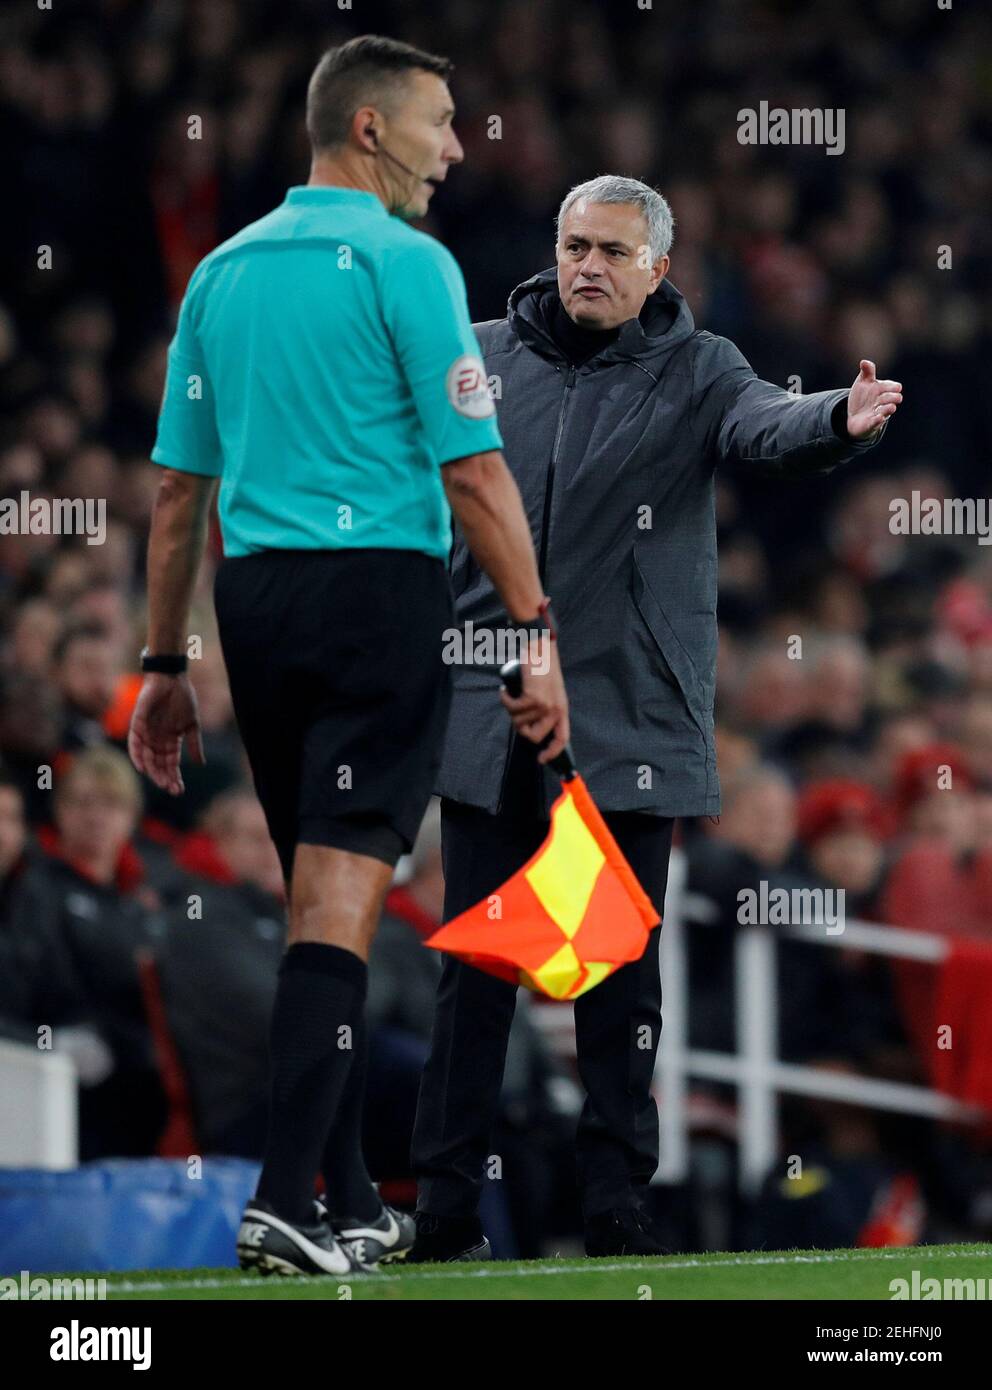 Soccer Football - Premier League - Arsenal vs Manchester United - Emirates Stadium, London, Britain - December 2, 2017   Manchester United manager Jose Mourinho remonstrates with an assistant referee   REUTERS/Eddie Keogh    EDITORIAL USE ONLY. No use with unauthorized audio, video, data, fixture lists, club/league logos or "live" services. Online in-match use limited to 75 images, no video emulation. No use in betting, games or single club/league/player publications. Please contact your account representative for further details. Stock Photo